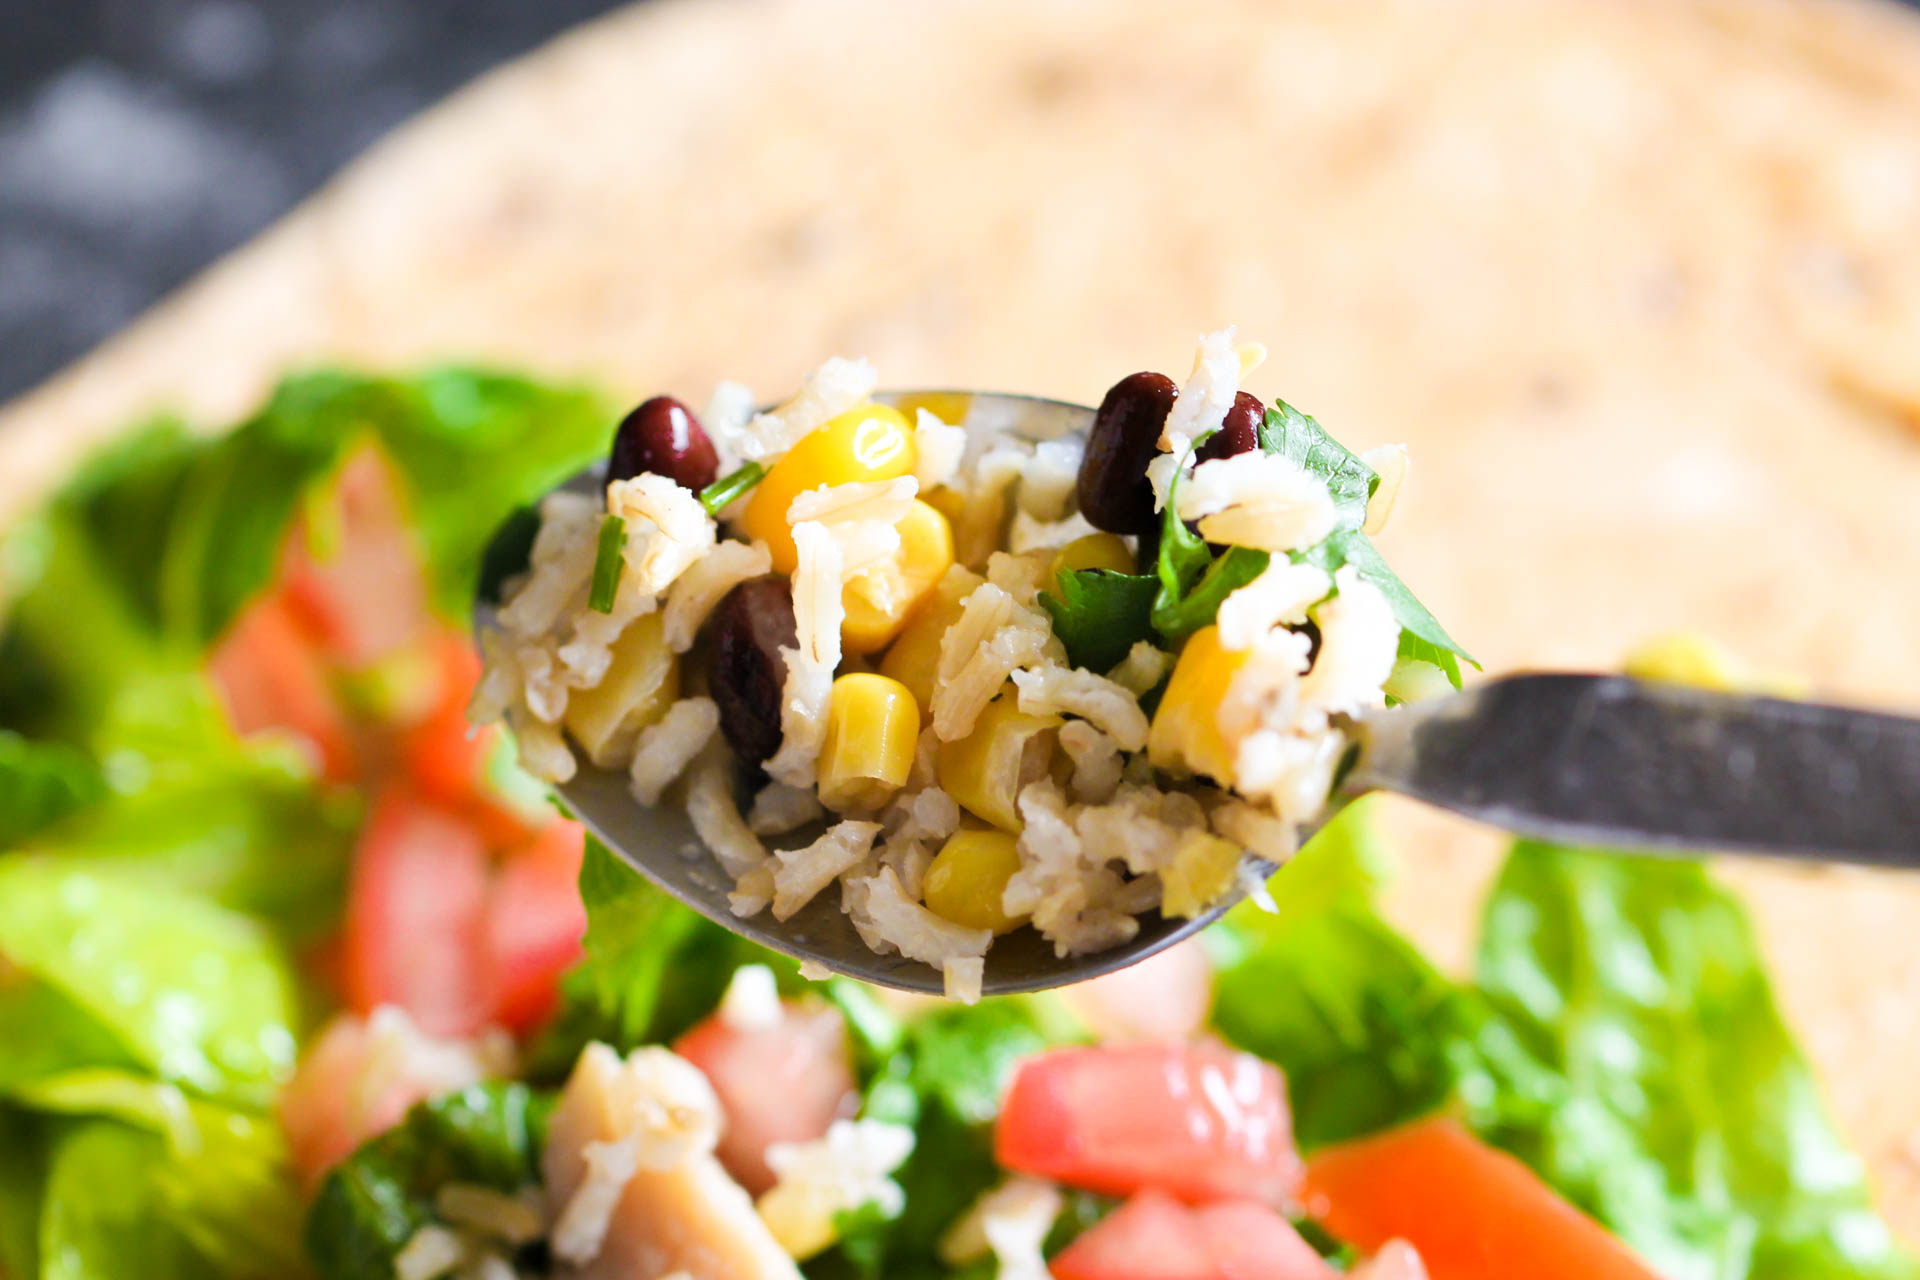 A spoonful of rice. corn, black beans and cilantro